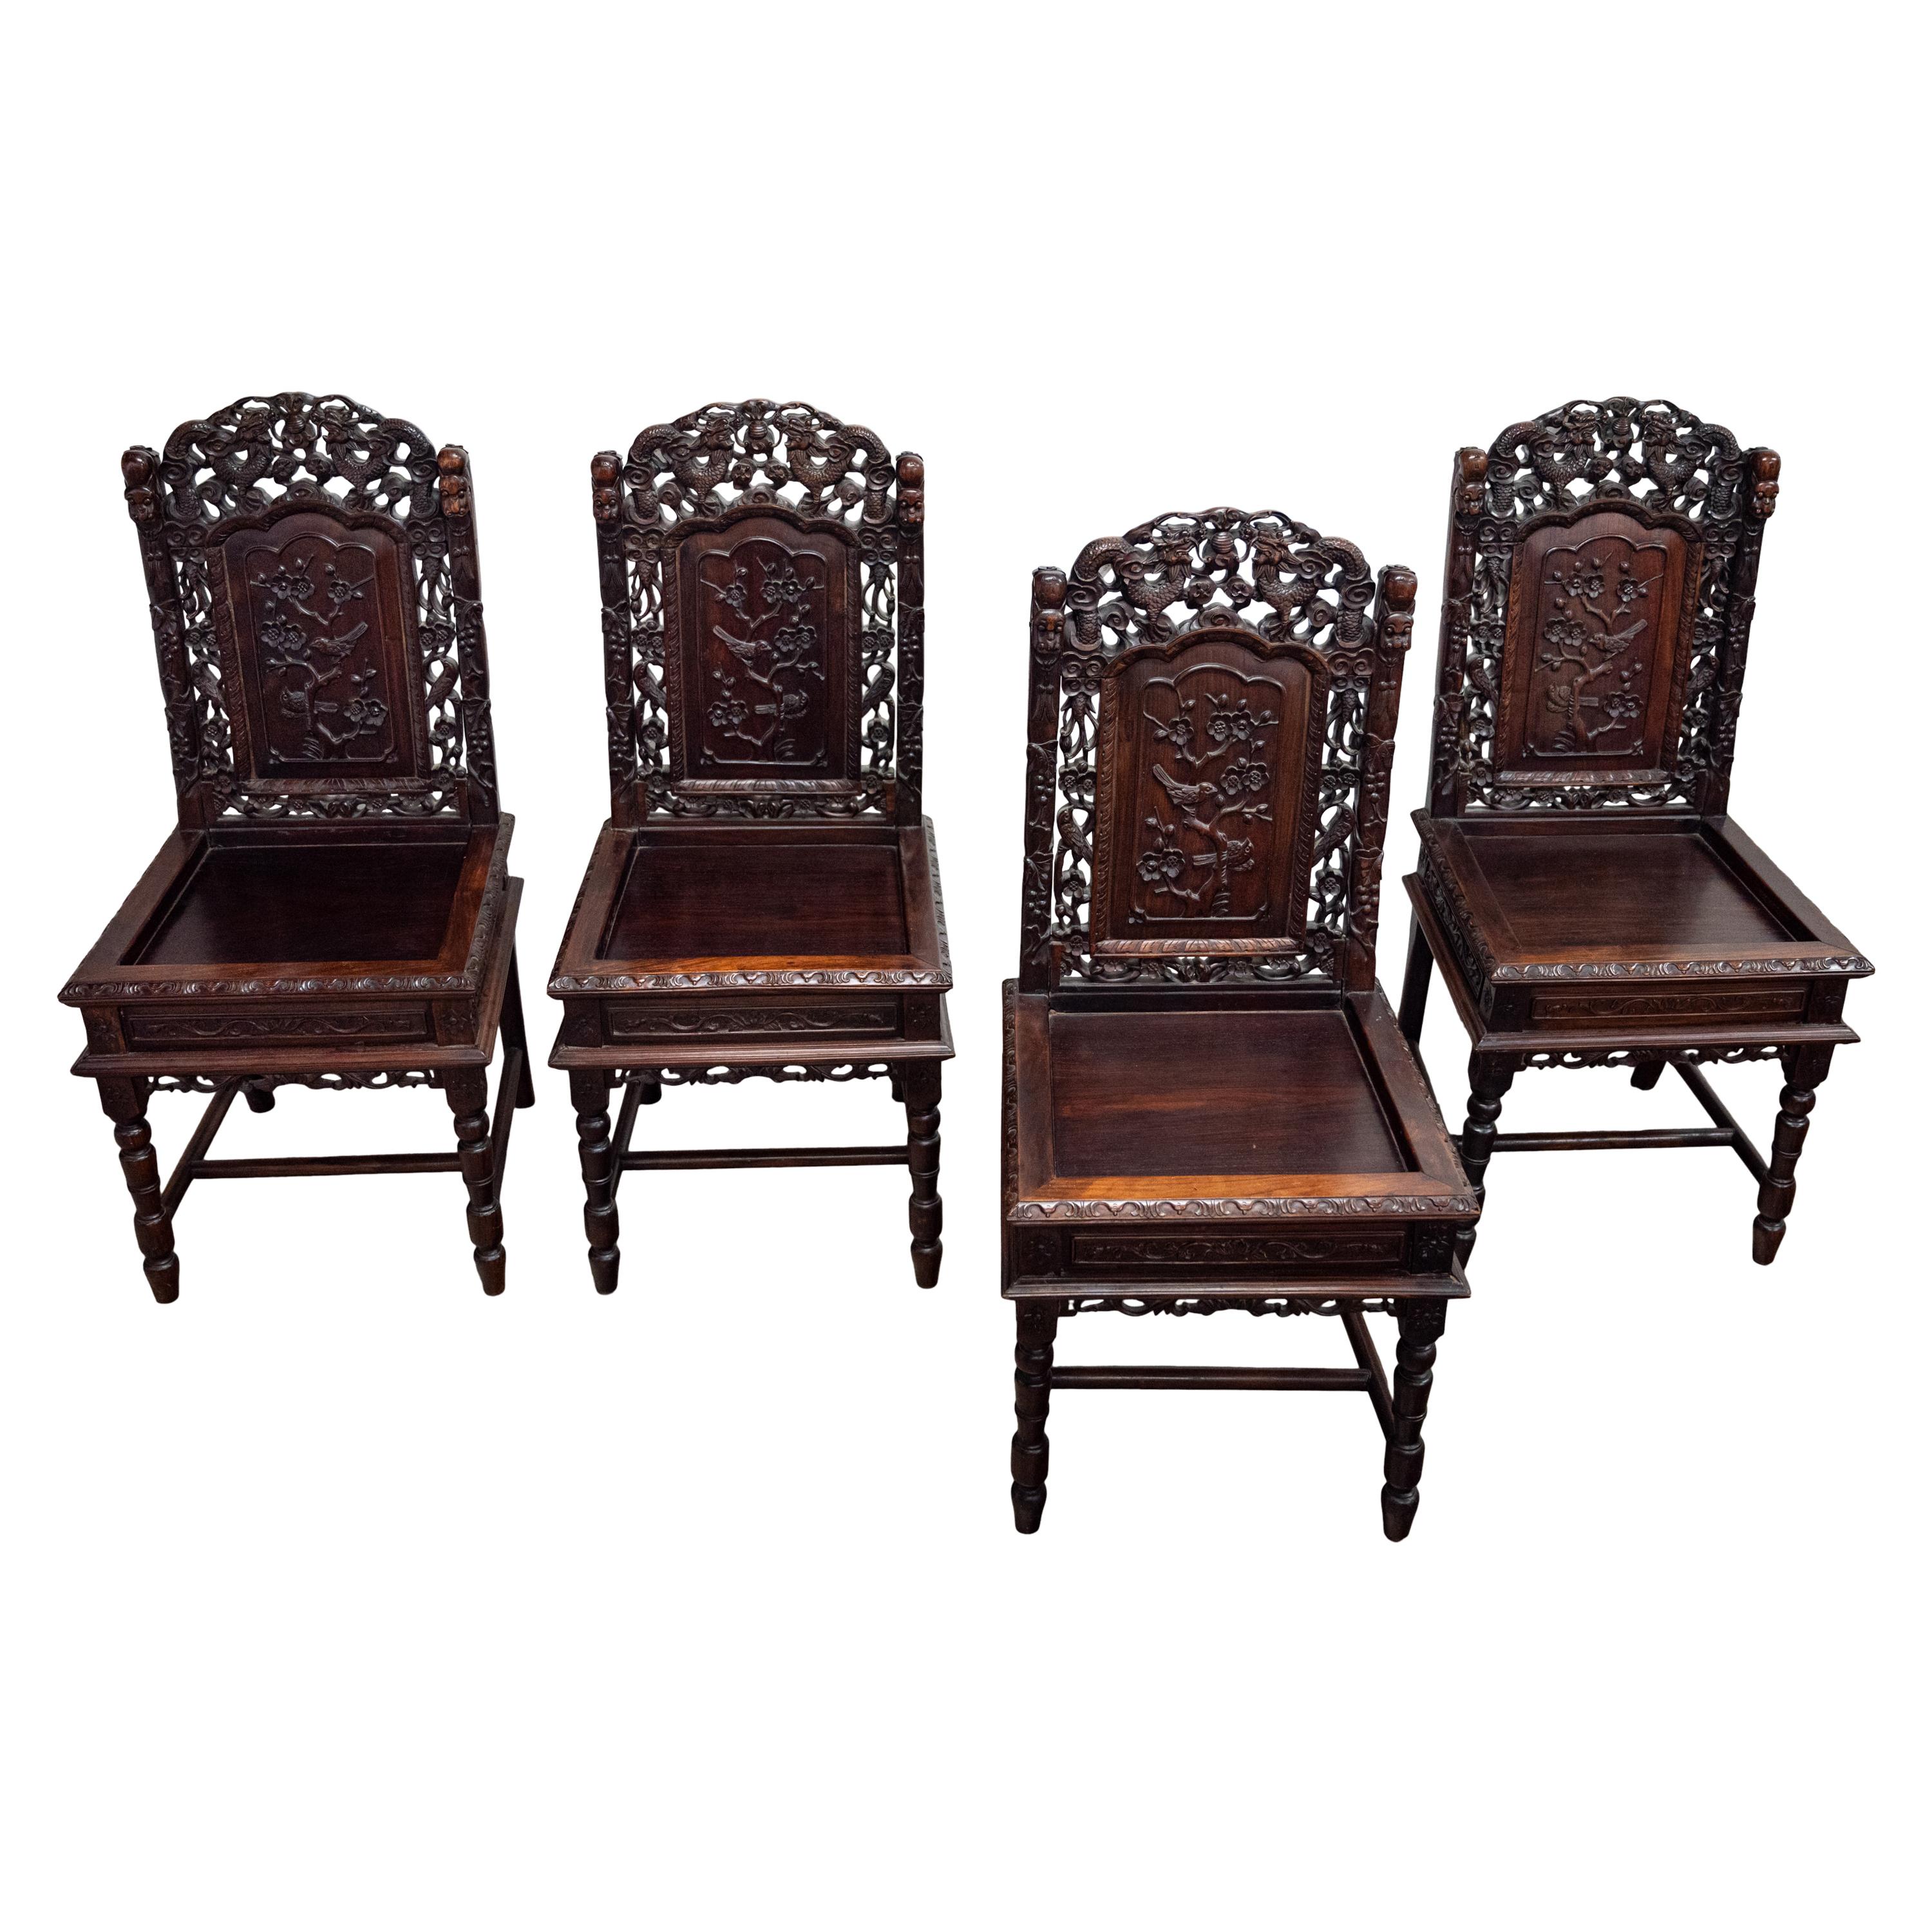 Four Antique Qing Dynasty Chinese Carved Rosewood Side Dining Dragon Chairs 1880 For Sale 6